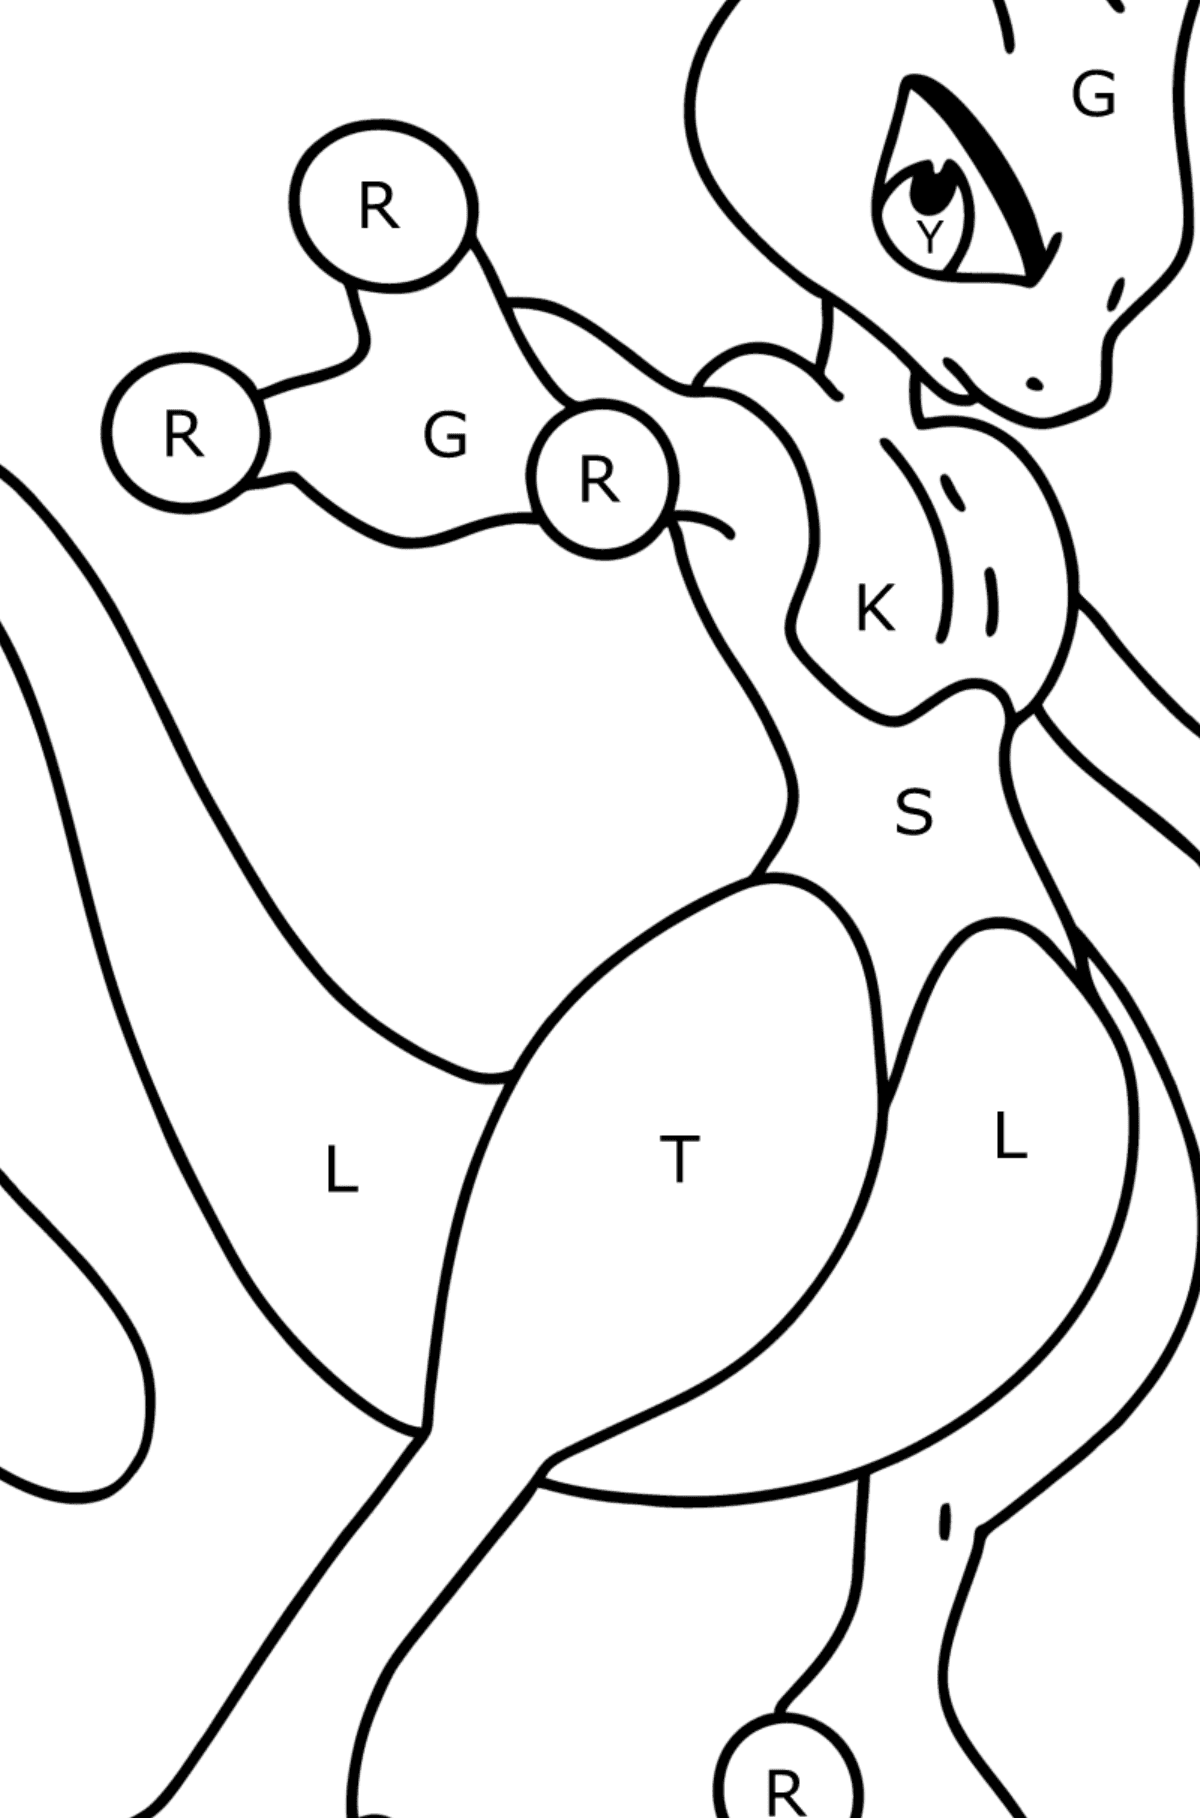 Coloring page Pokemon Go Mewtwo - Coloring by Letters for Kids